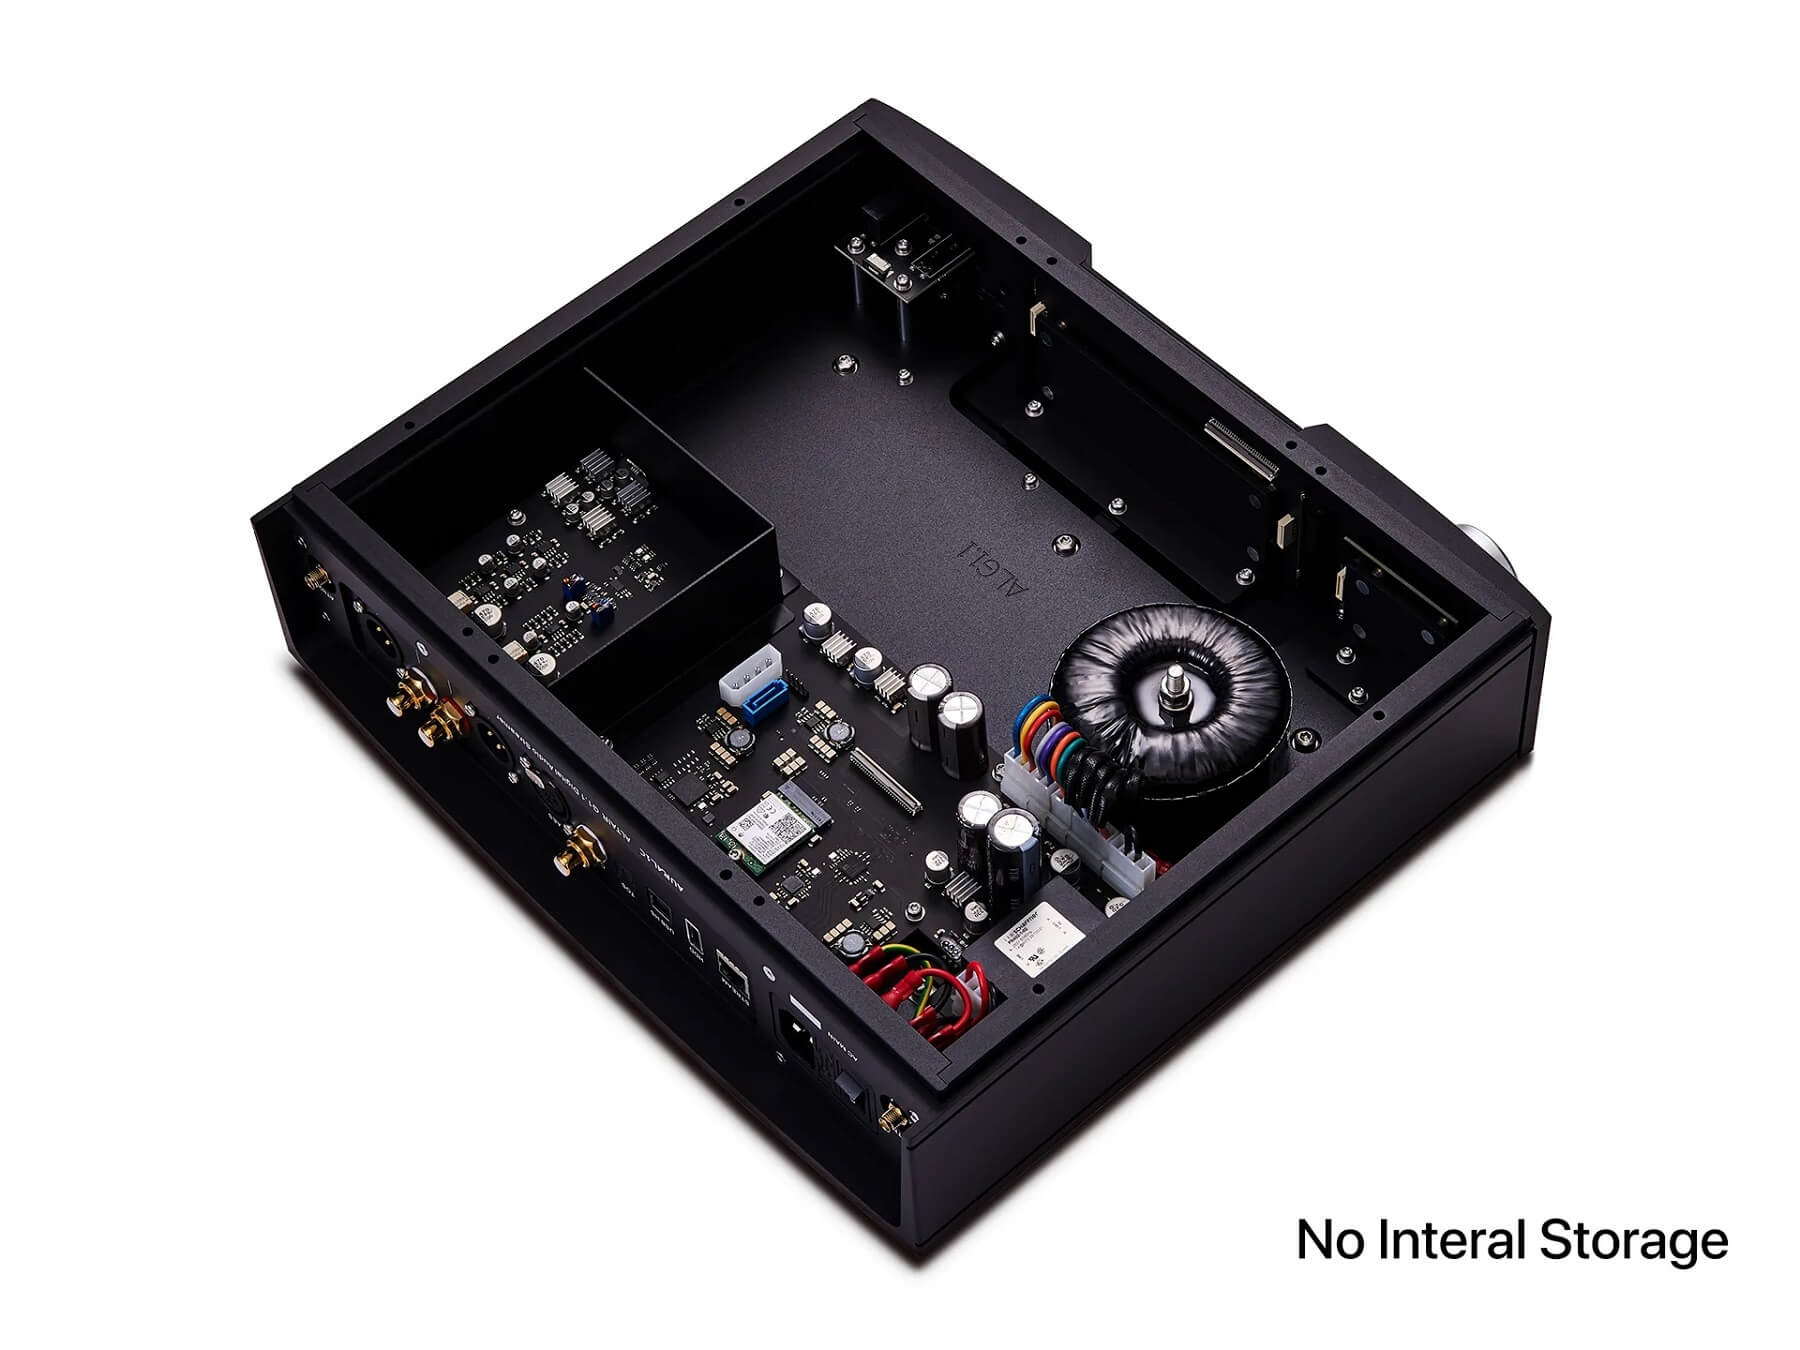 Auralic Altair G1.1 - Internals without HDD